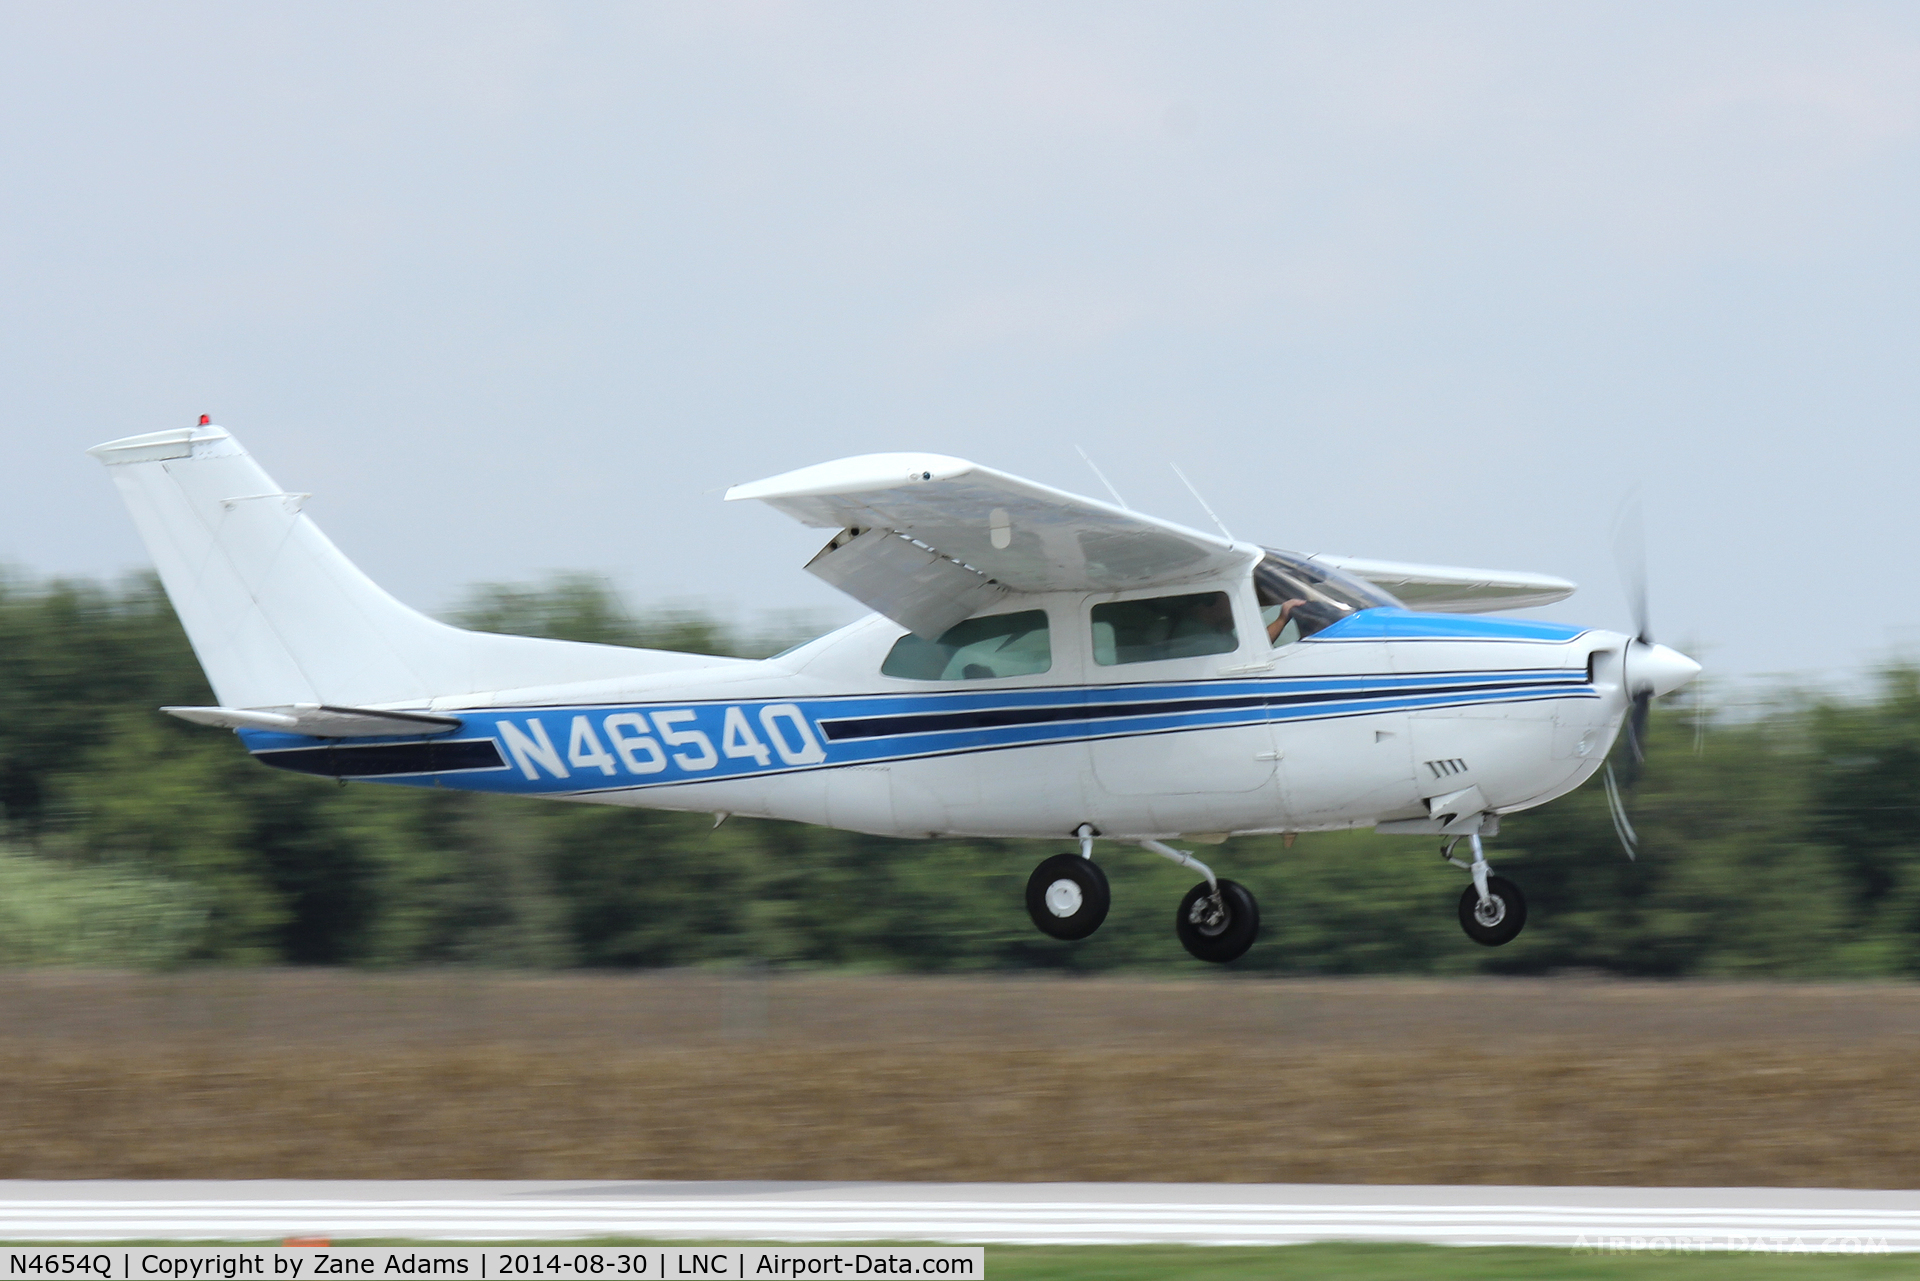 N4654Q, 1972 Cessna 210L Centurion C/N 21059554, At the 2014 Warbirds on Parade